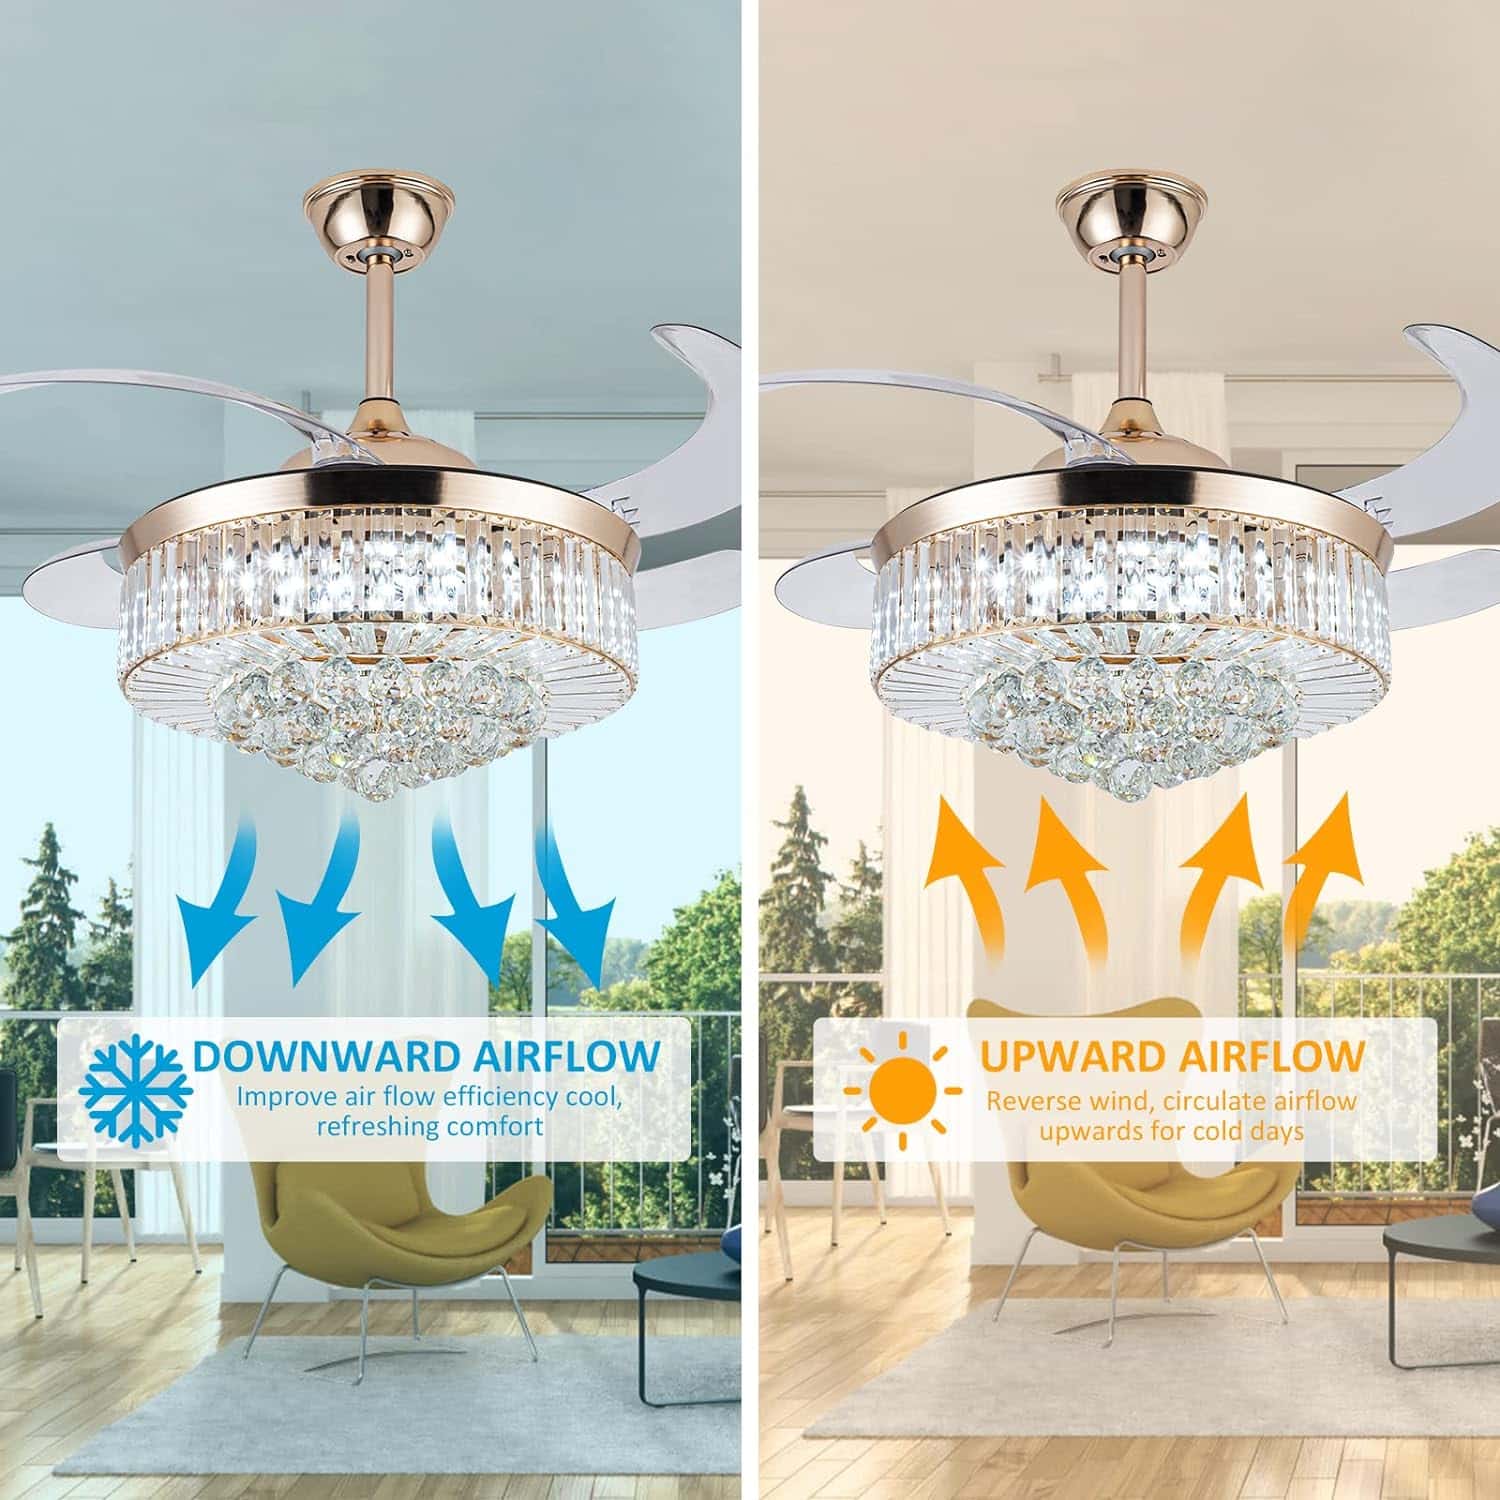 36 Stepless Dimming Chandelier Crystal Ceiling Fan with Lights, Reversible Modern Fandelier with Remote Retractable Invisible Blades 6 Speeds Indoor Ceiling Fan Light for Living Room Bedroom Kitchen